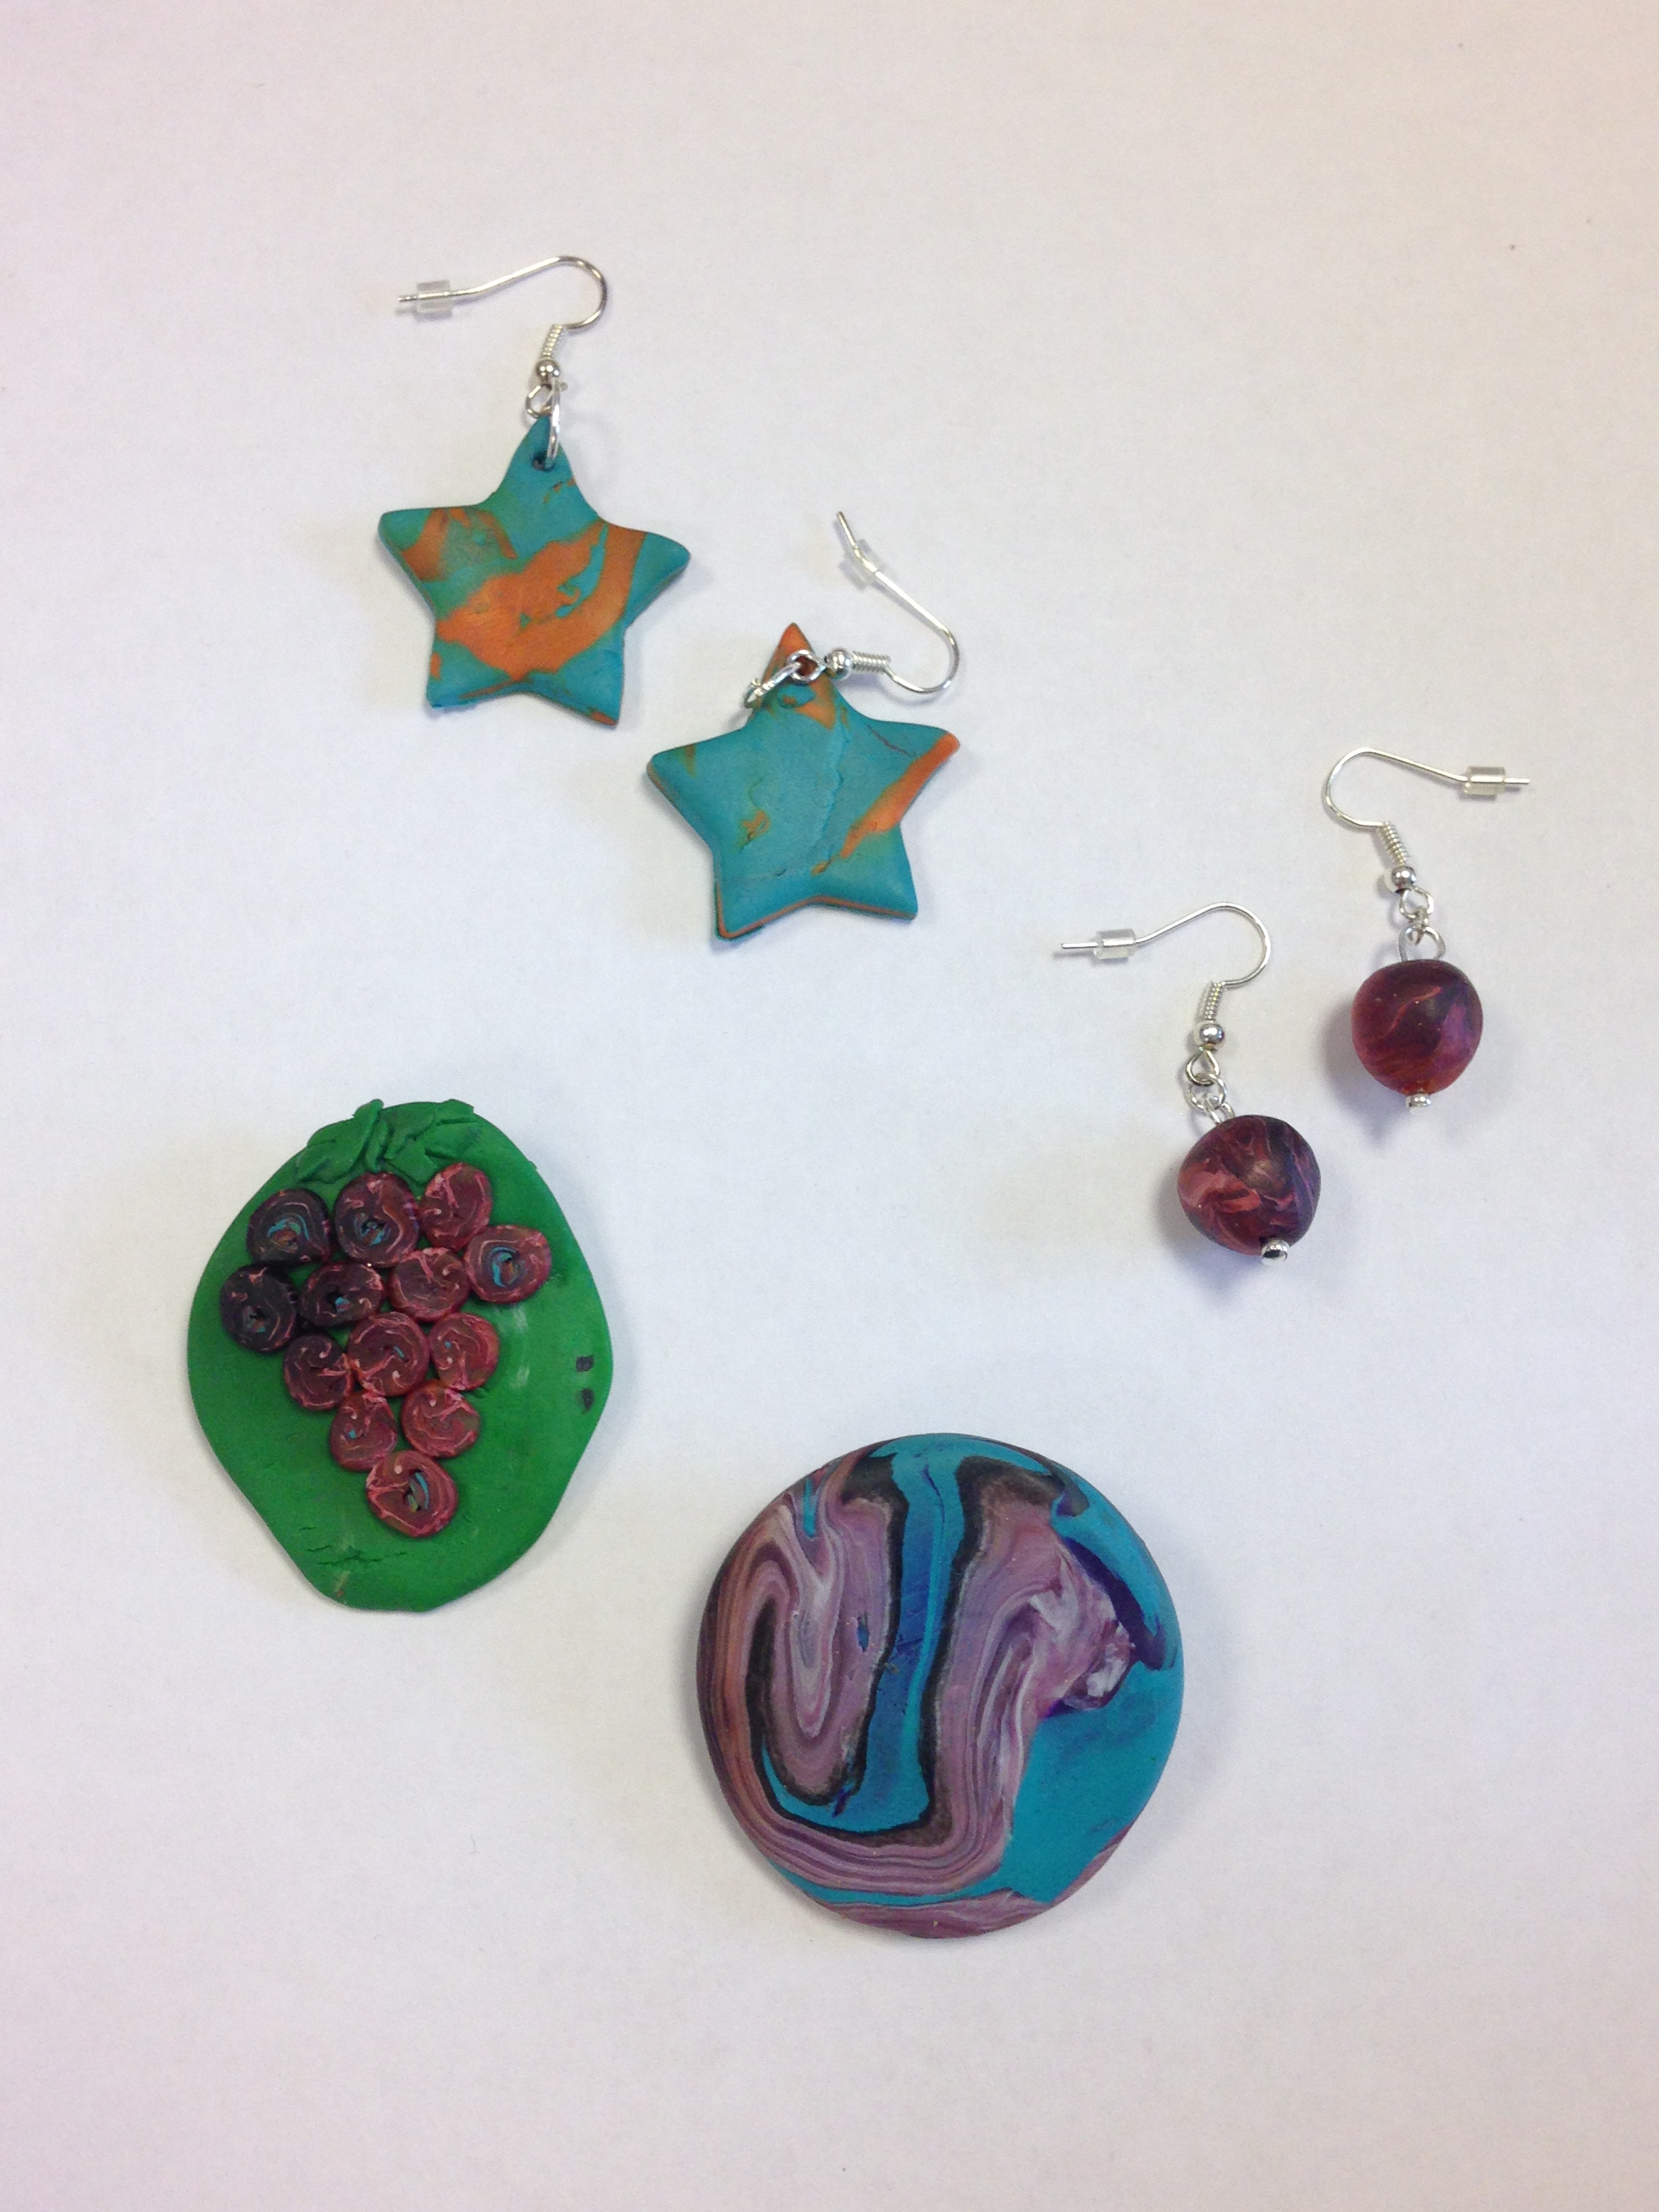 brooch with different colours and one with grapes; earrings as a shape of stars and balls